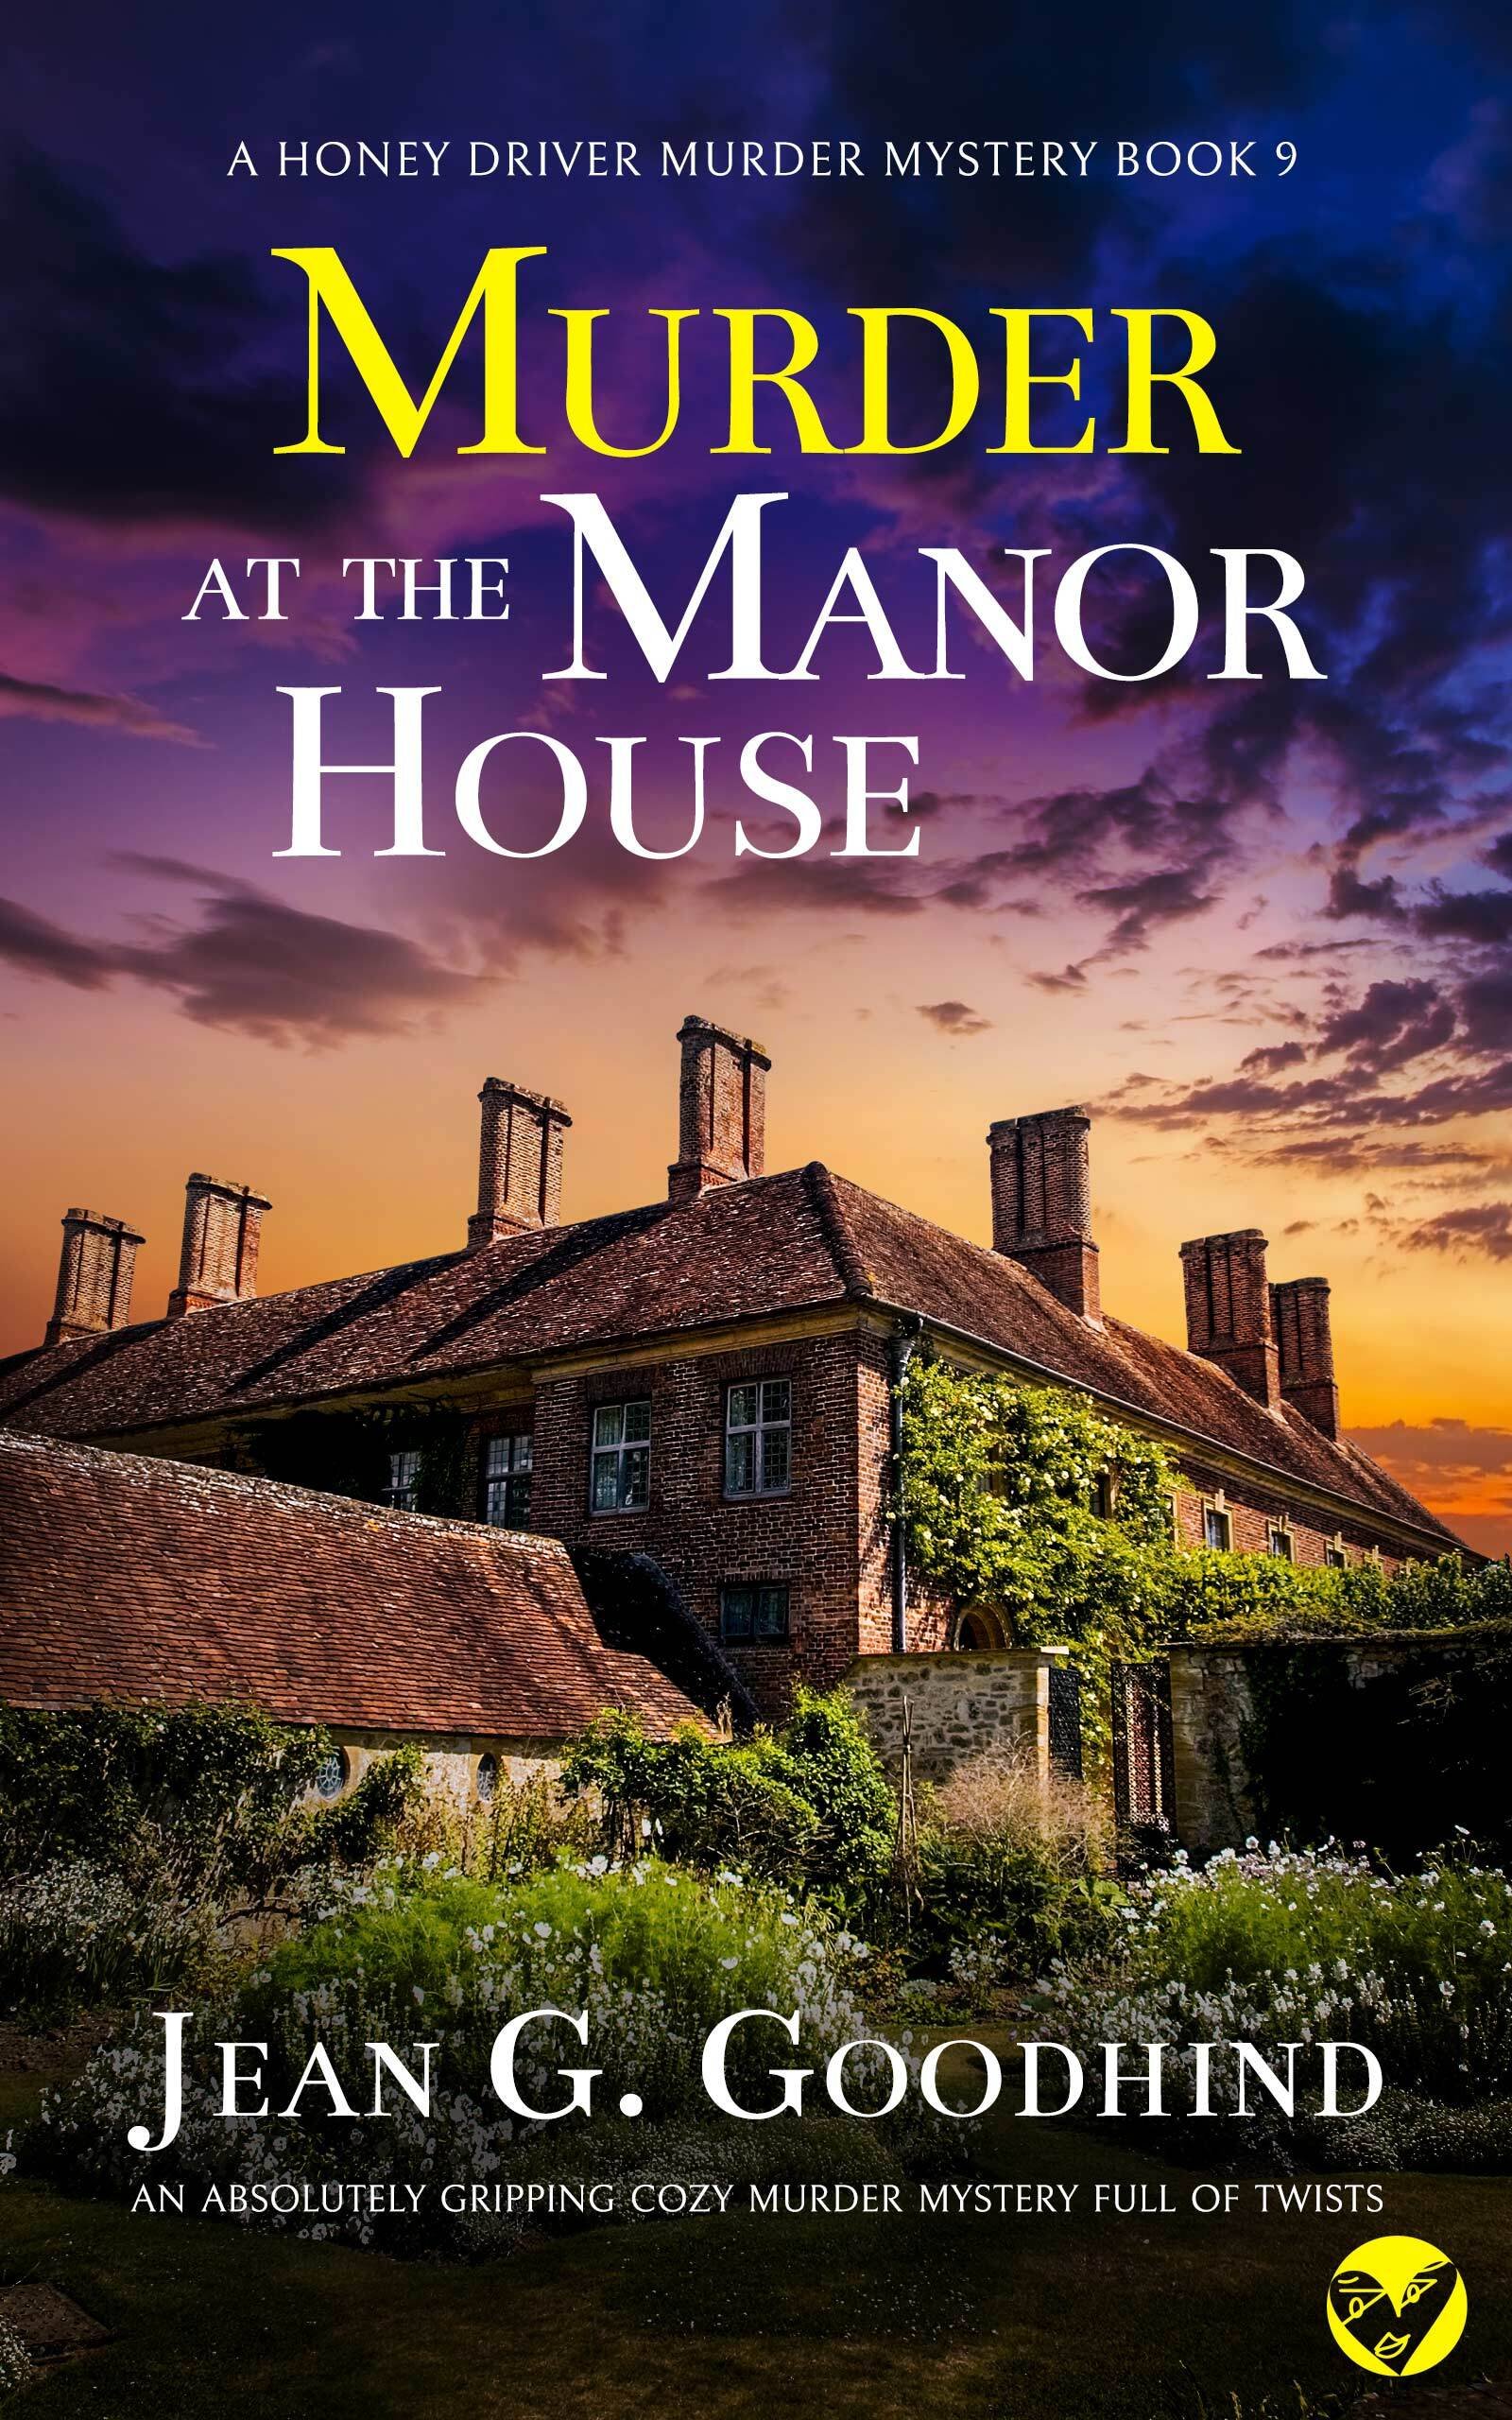 MURDER AT THE MANOR HOUSE Cover publish 617KB.jpg